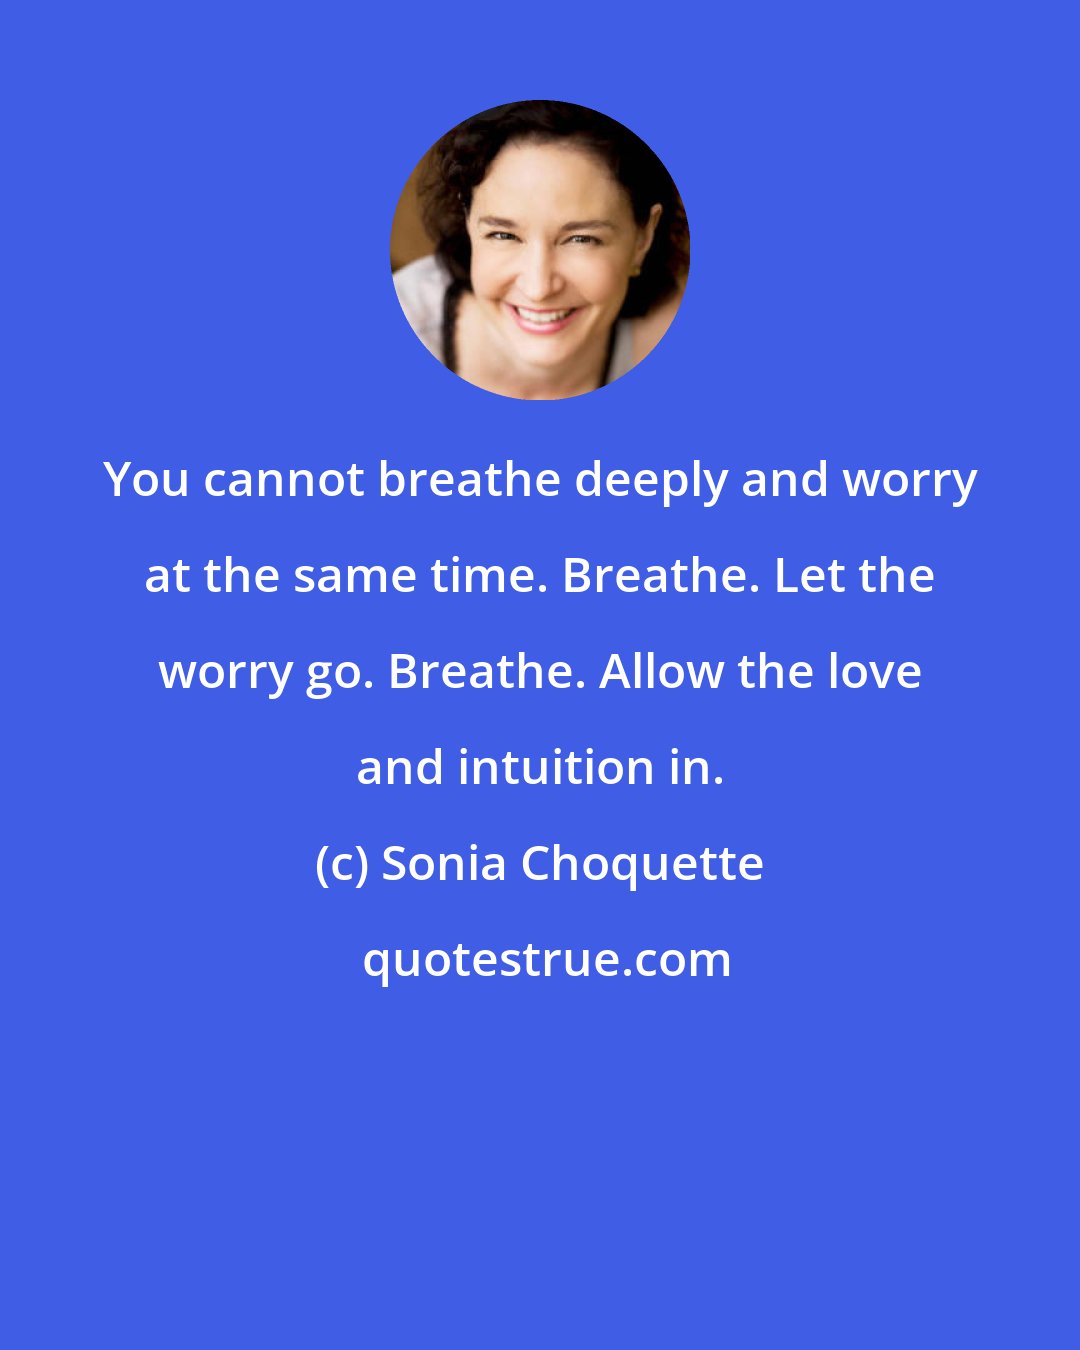 Sonia Choquette: You cannot breathe deeply and worry at the same time. Breathe. Let the worry go. Breathe. Allow the love and intuition in.